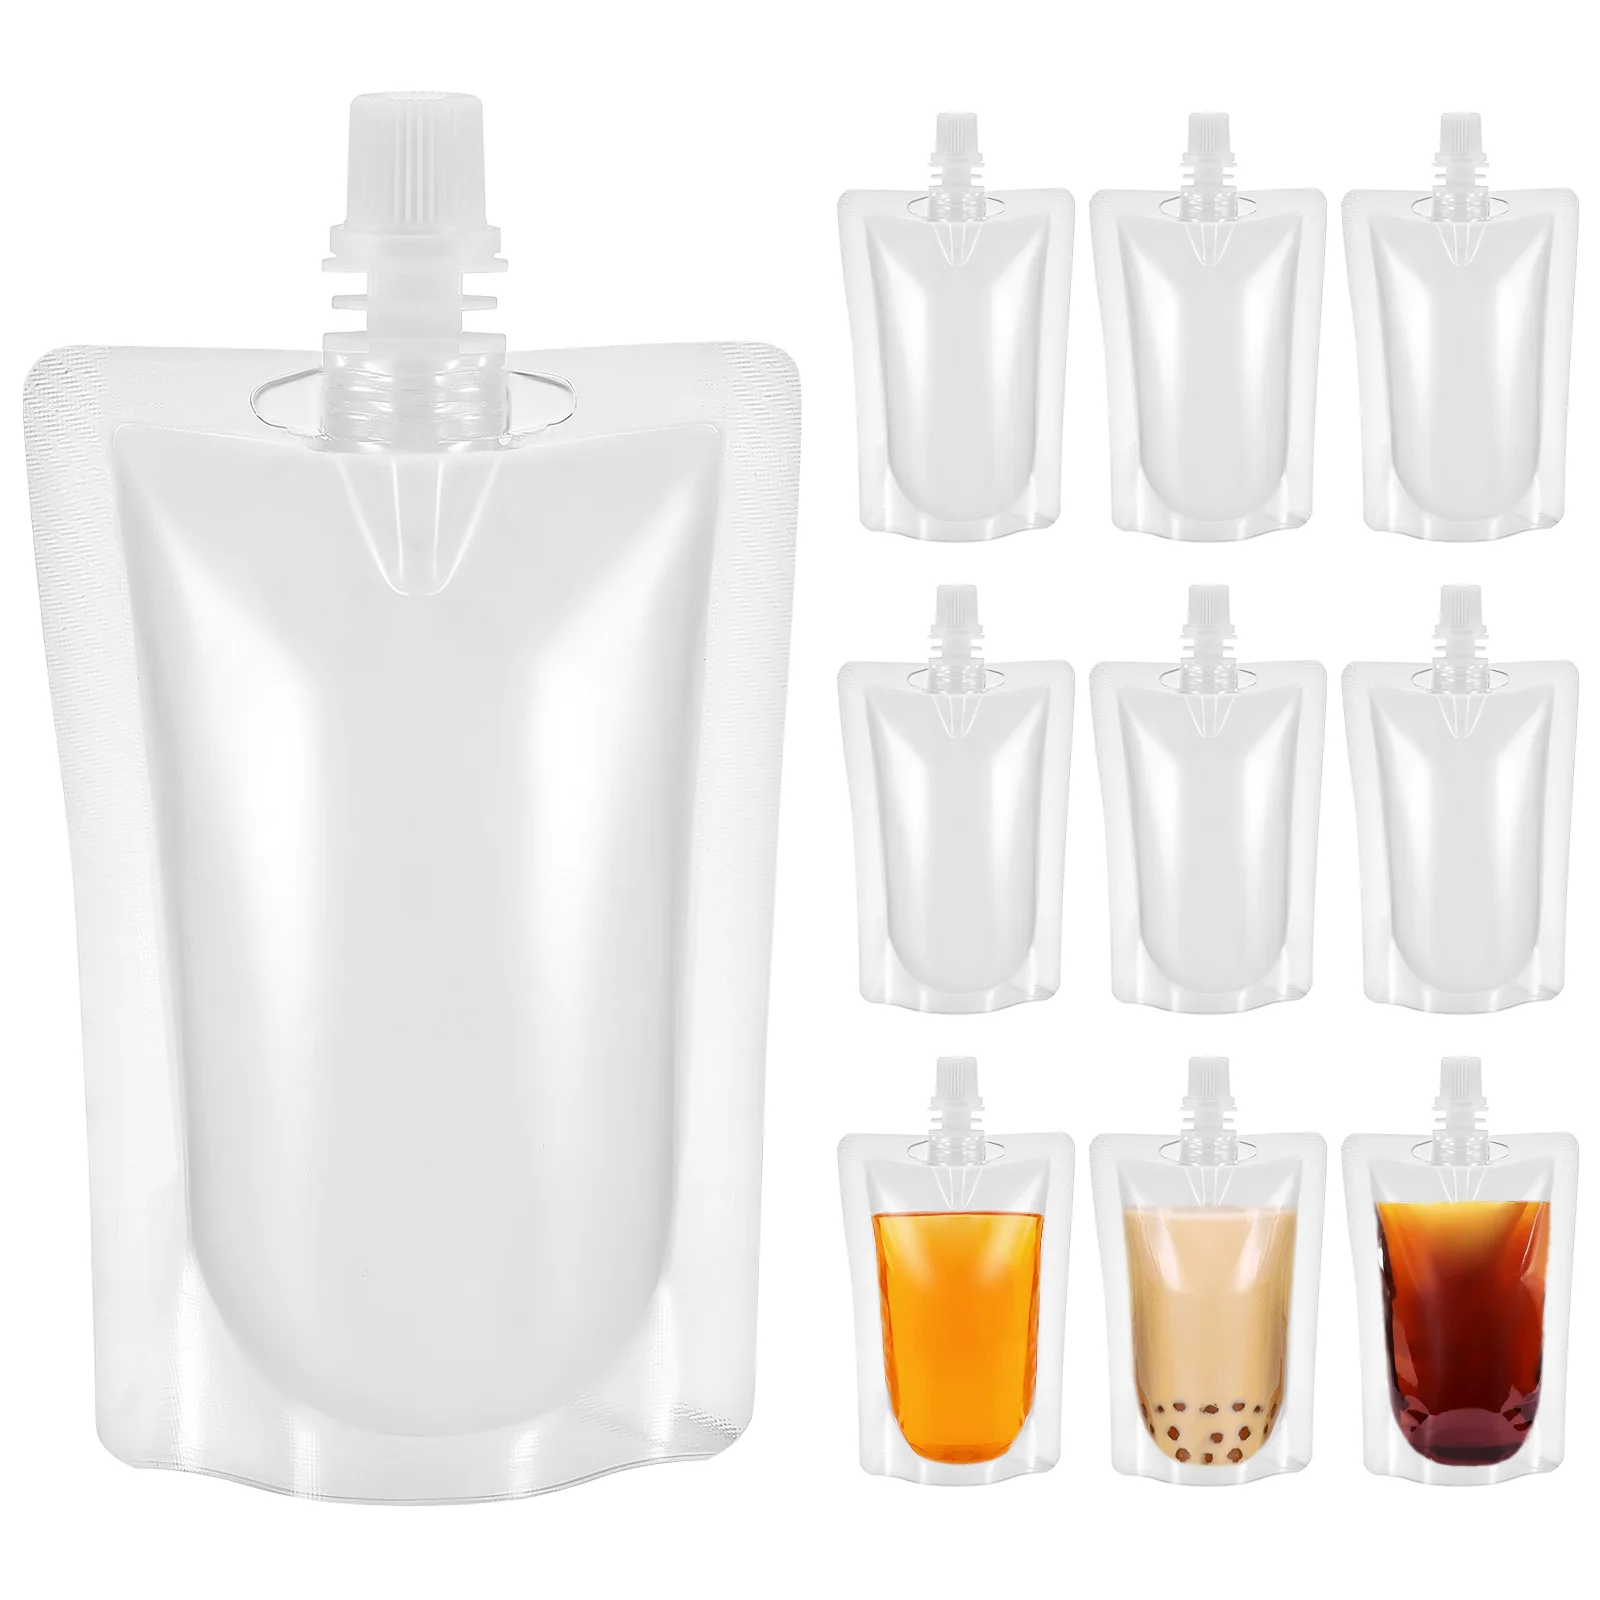 

Flask Pouches Flasks Drink Adults Reusable Drinks Disposable Cruise Clear Smuggling Pouch Portable Runners Rum Spout Travel